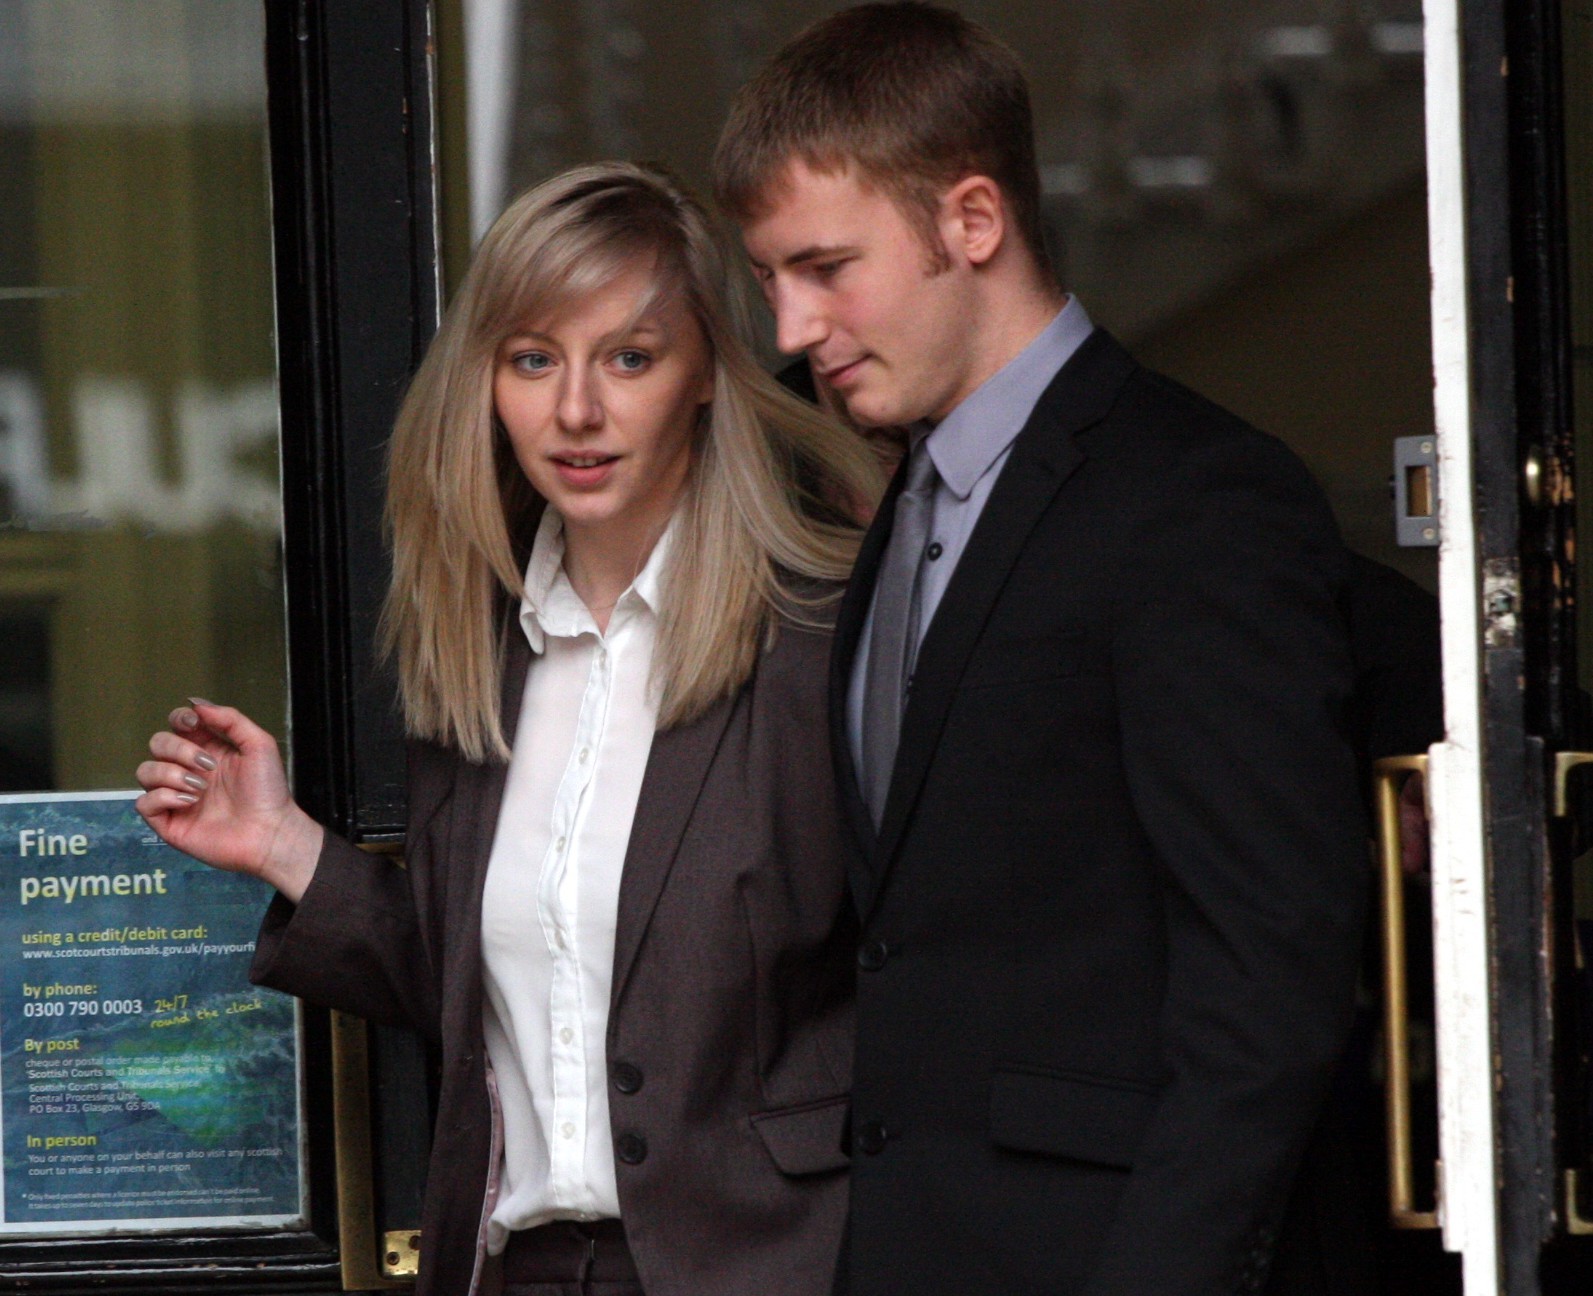 Rebecca Laidlaw with her current partner outside court